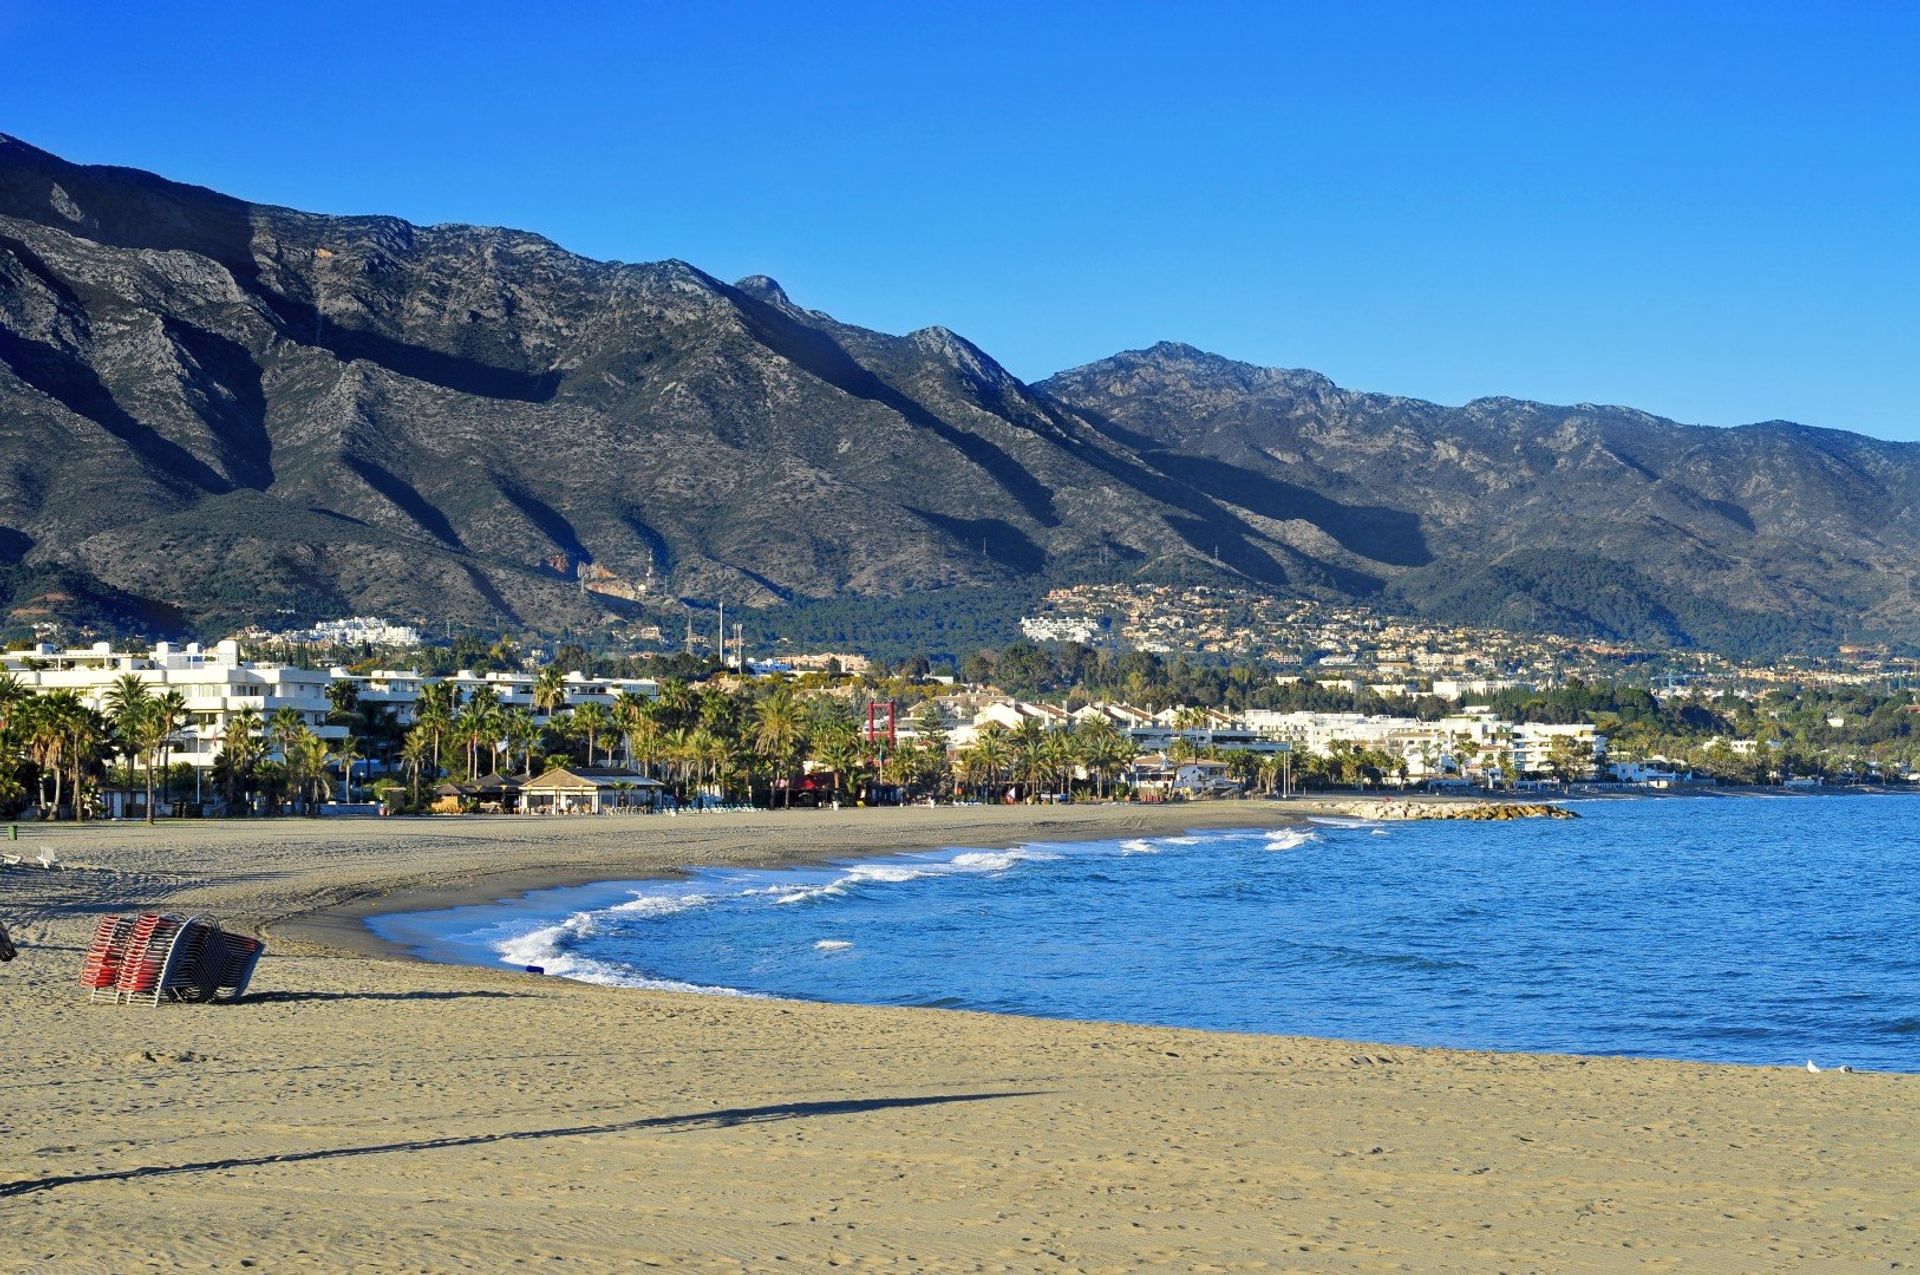 For a tranquil family day by the coast, head to Nueva Andalucia beach boasting golden sands and crystal clear waters